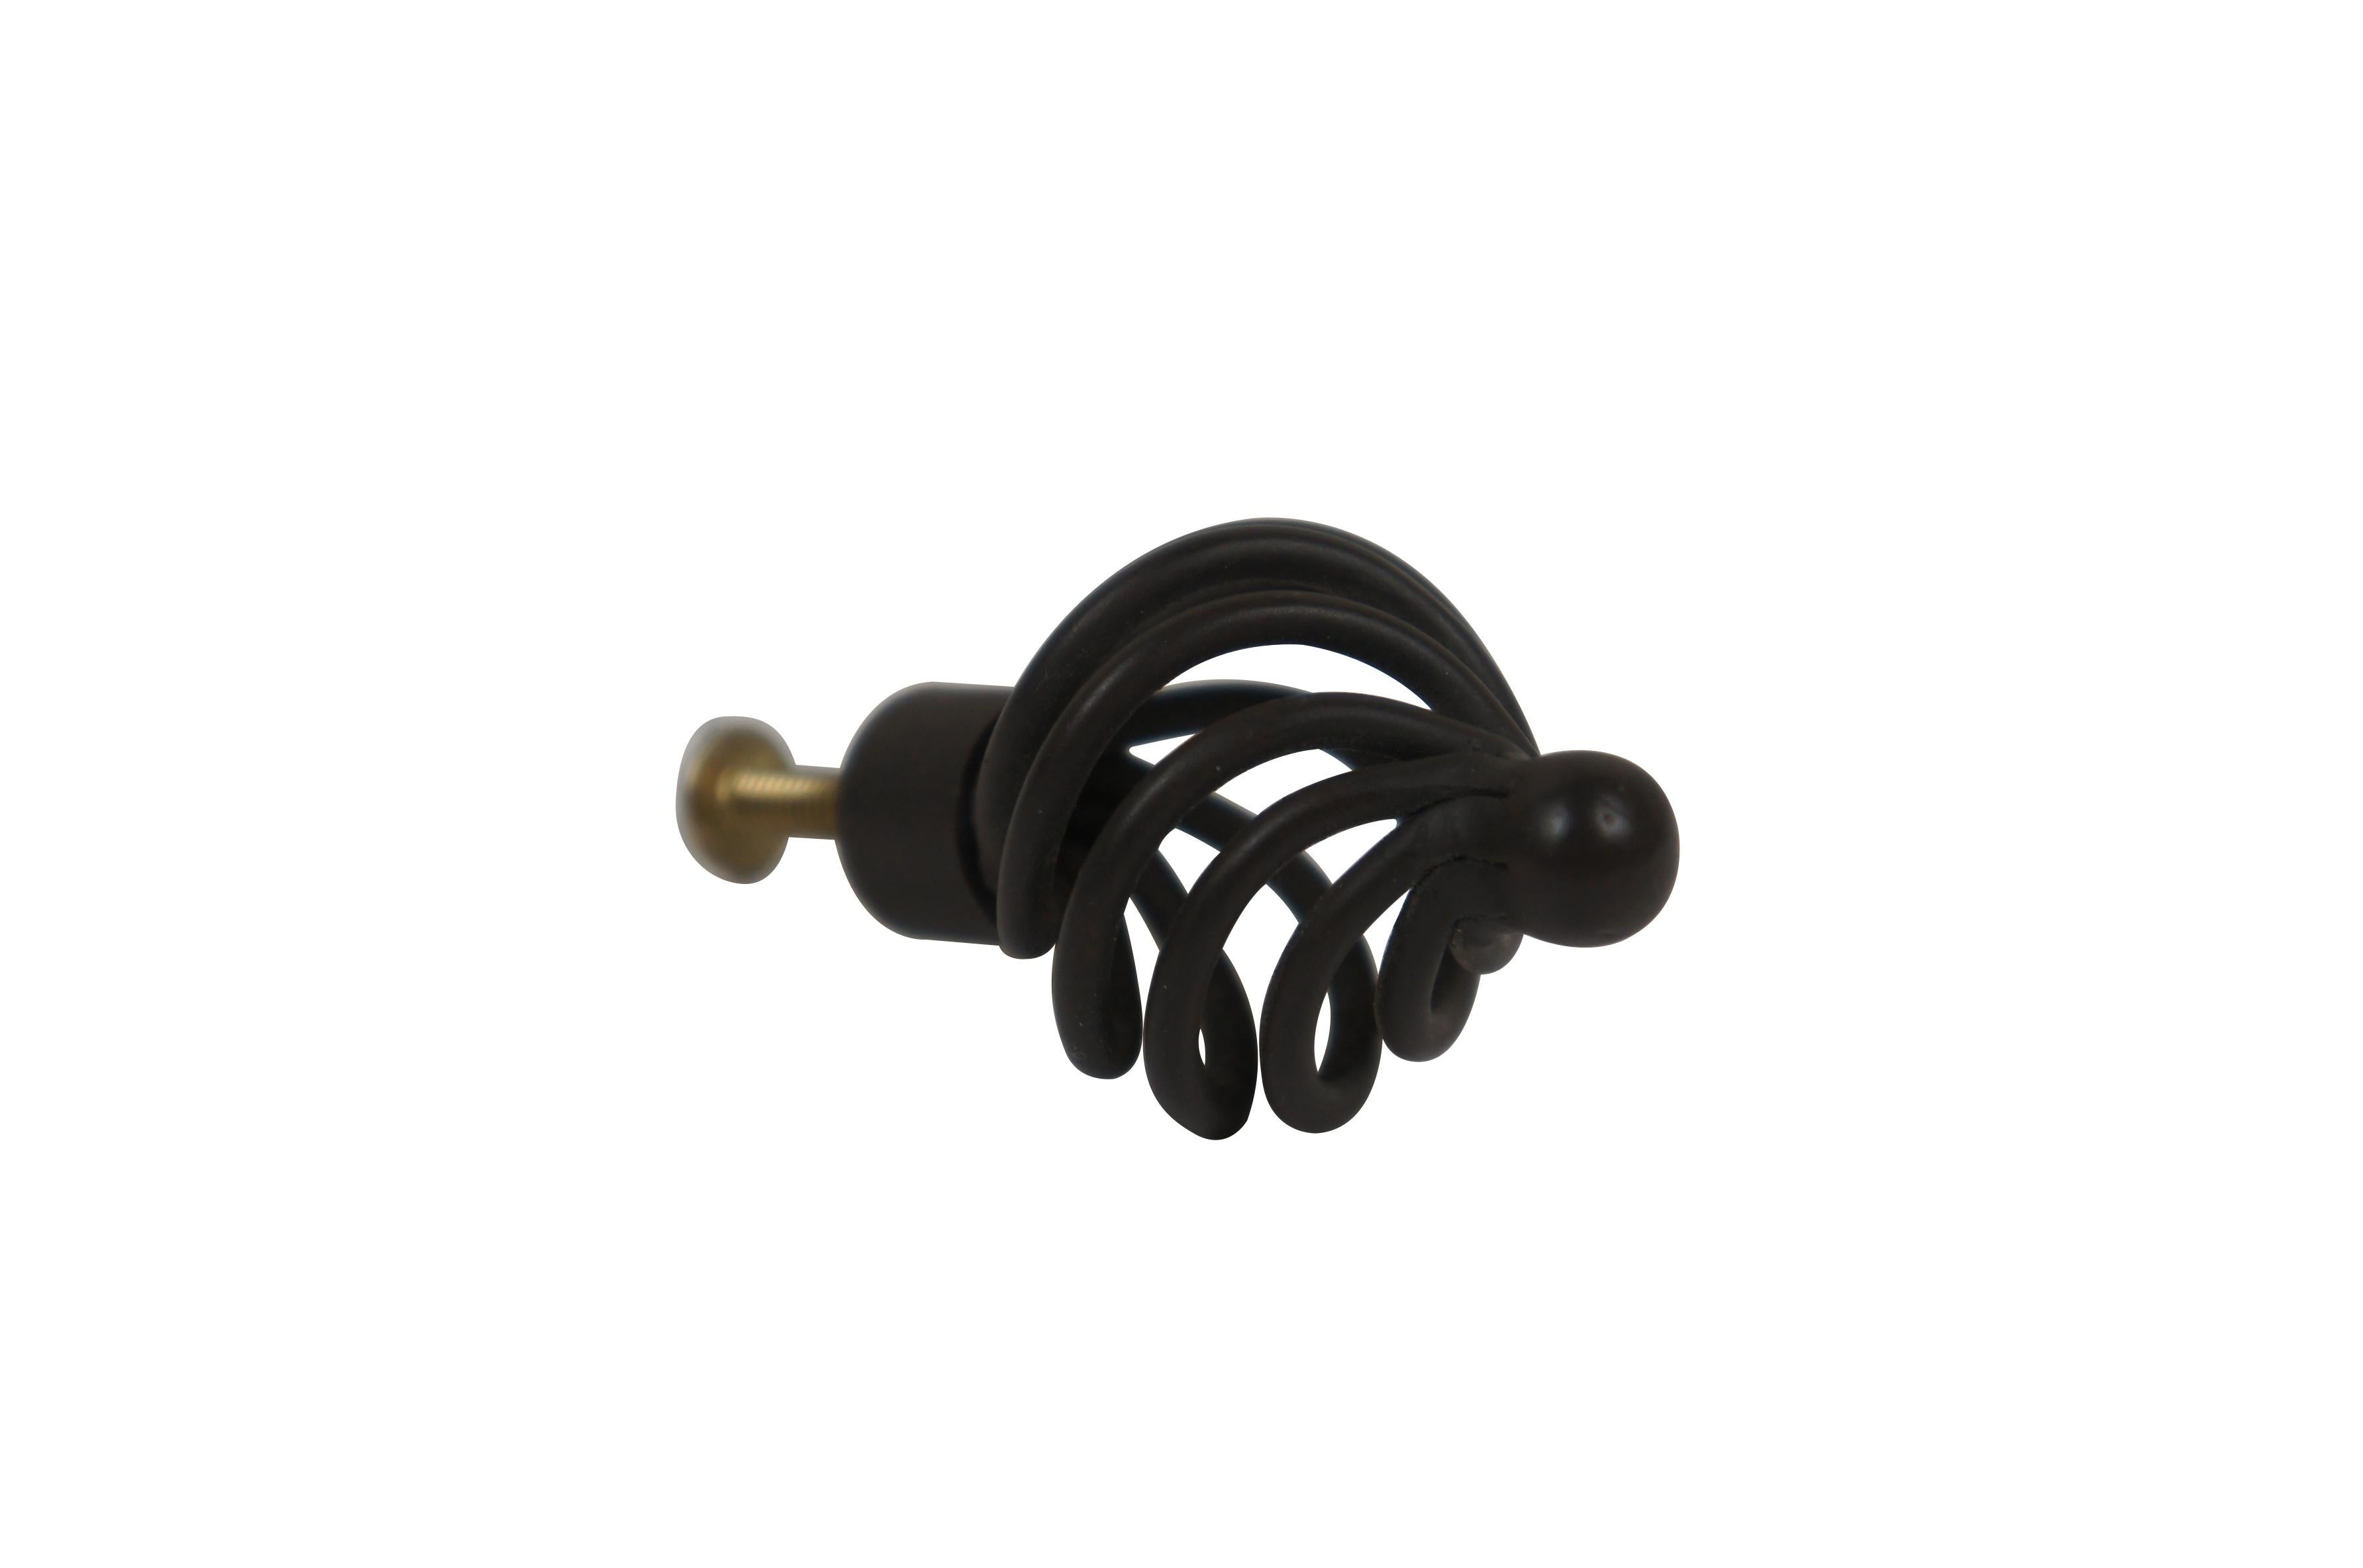 32 Available - Twisted metal round birdcage style cabinet / drawer pull / knob, finished in deep brown / dark bronze. 

Dimensions:
1.25